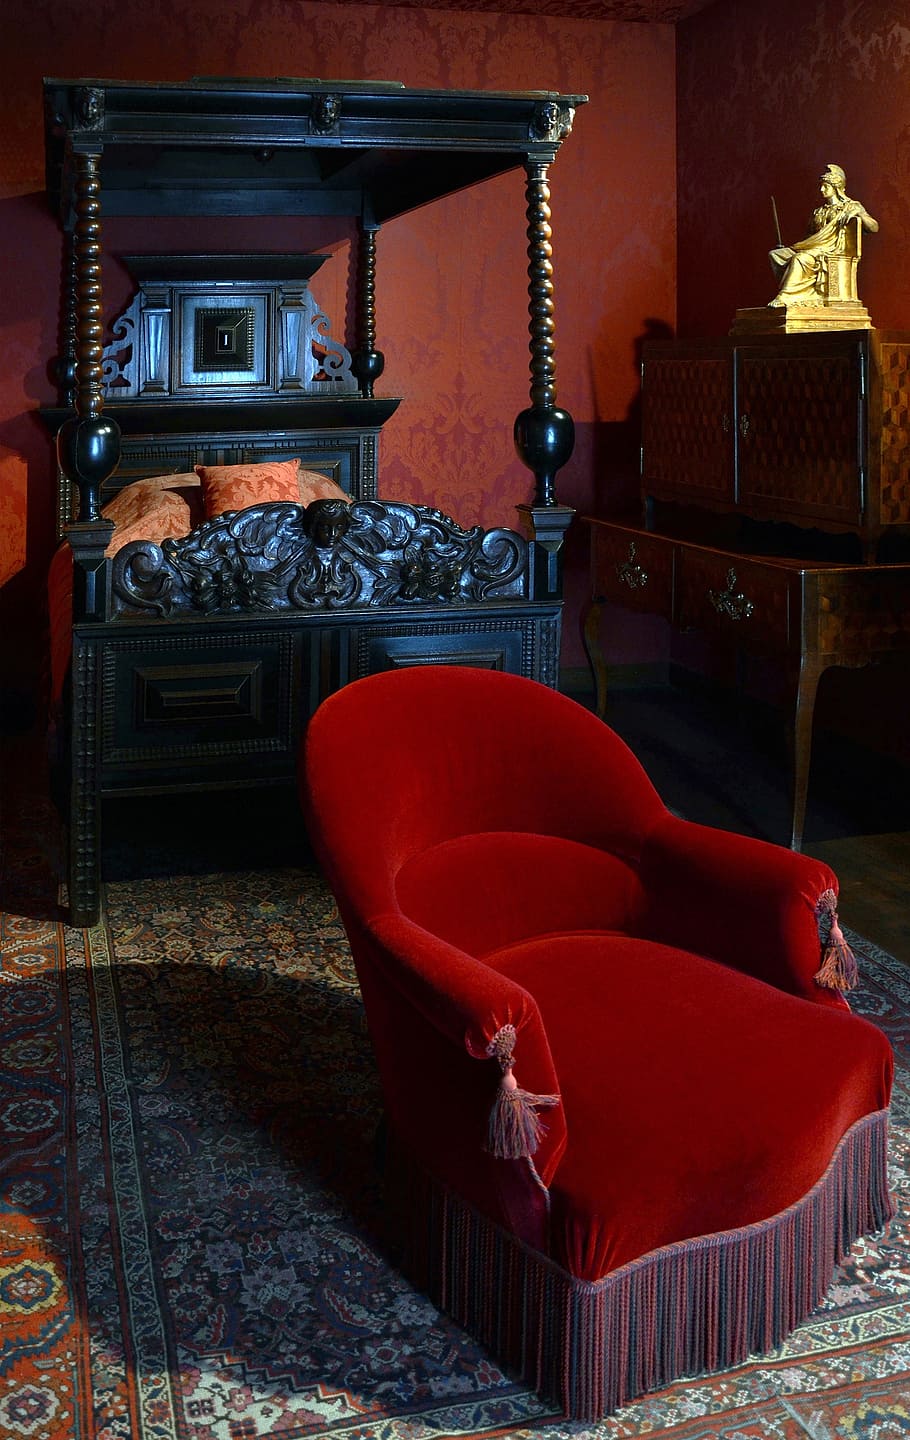 paris, france, victor hugo home, bedroom, chair, bed, architecture, interior, seat, furniture